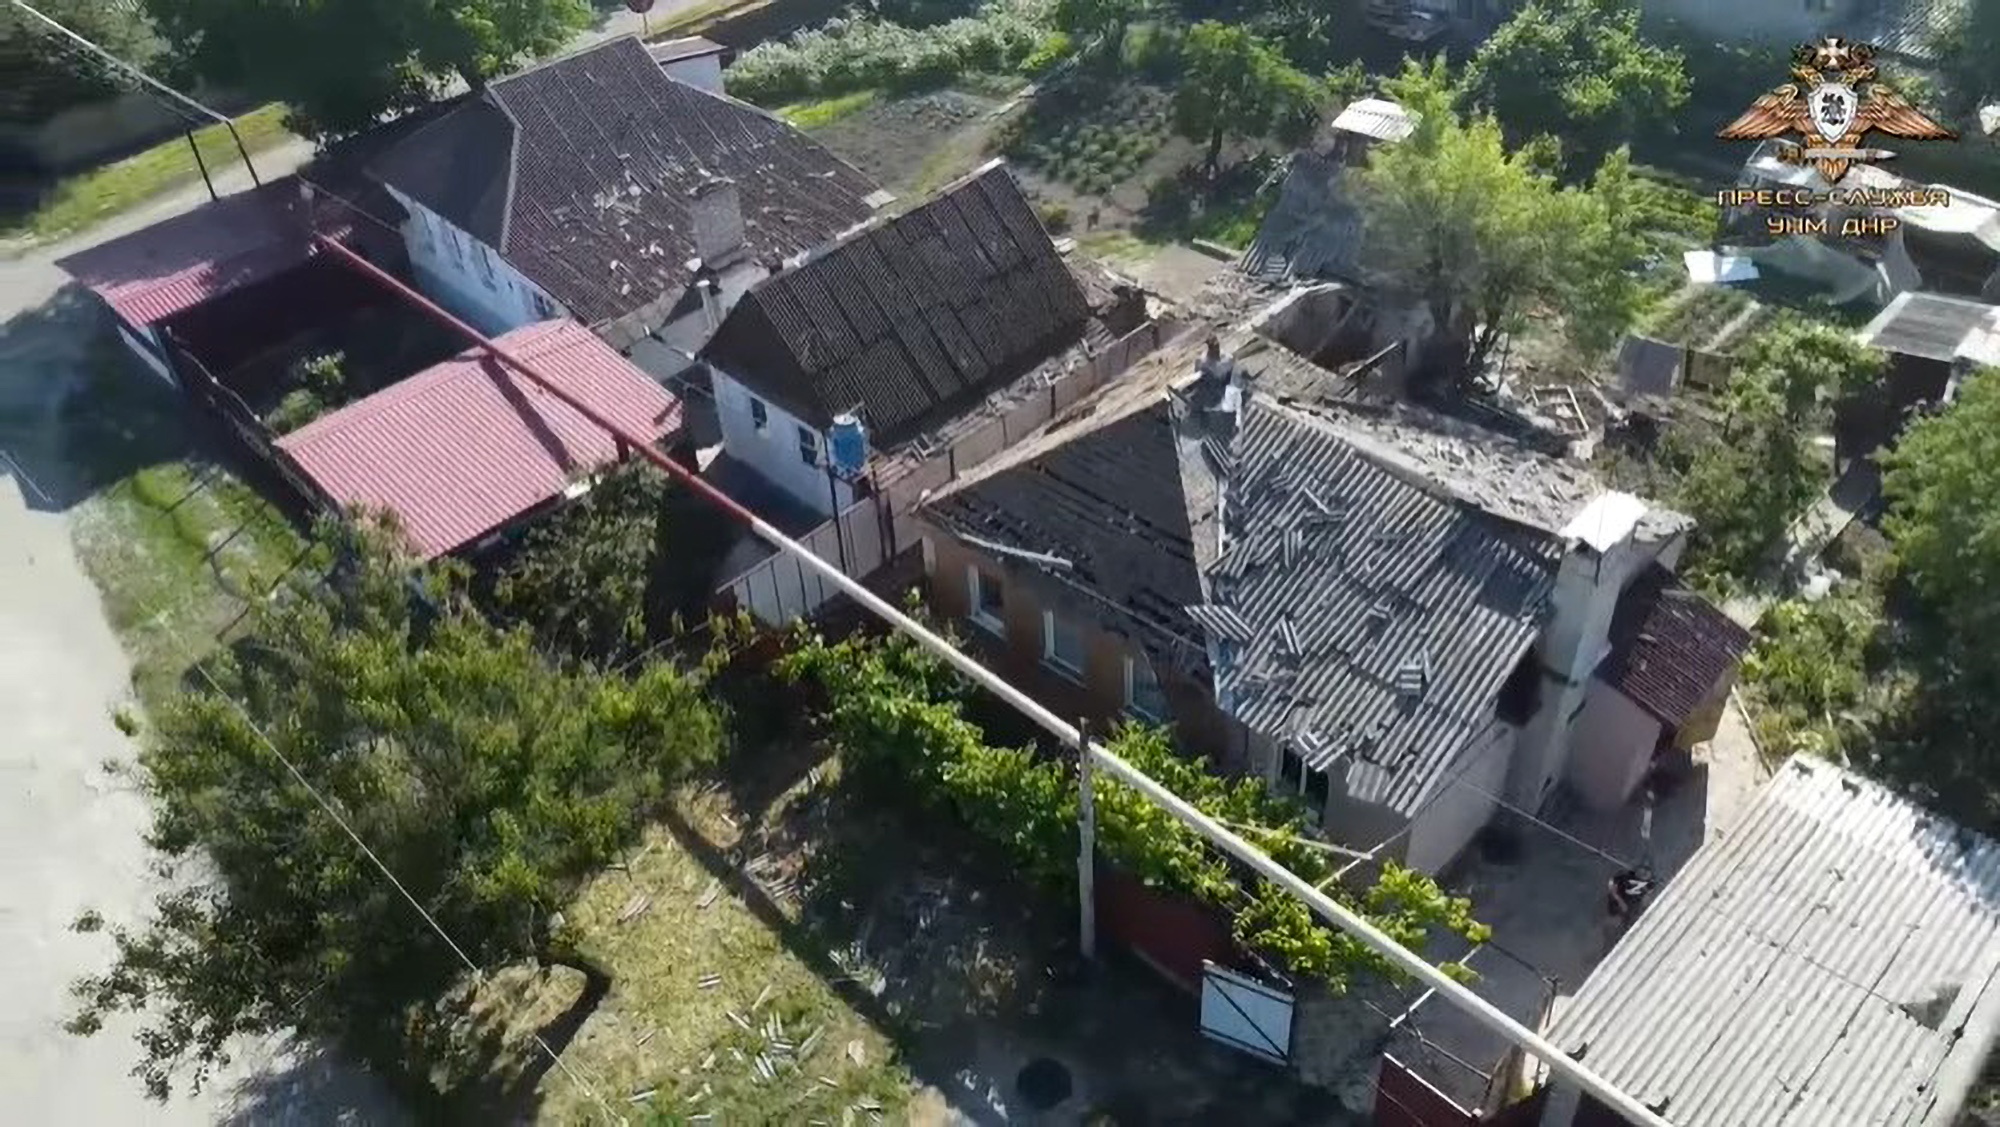 Read more about the article WAR IN UKRAINE: Pro-Russian DPR Accuses Ukrainians Of Firing Missile At City In Attack That Killed Civilian Woman